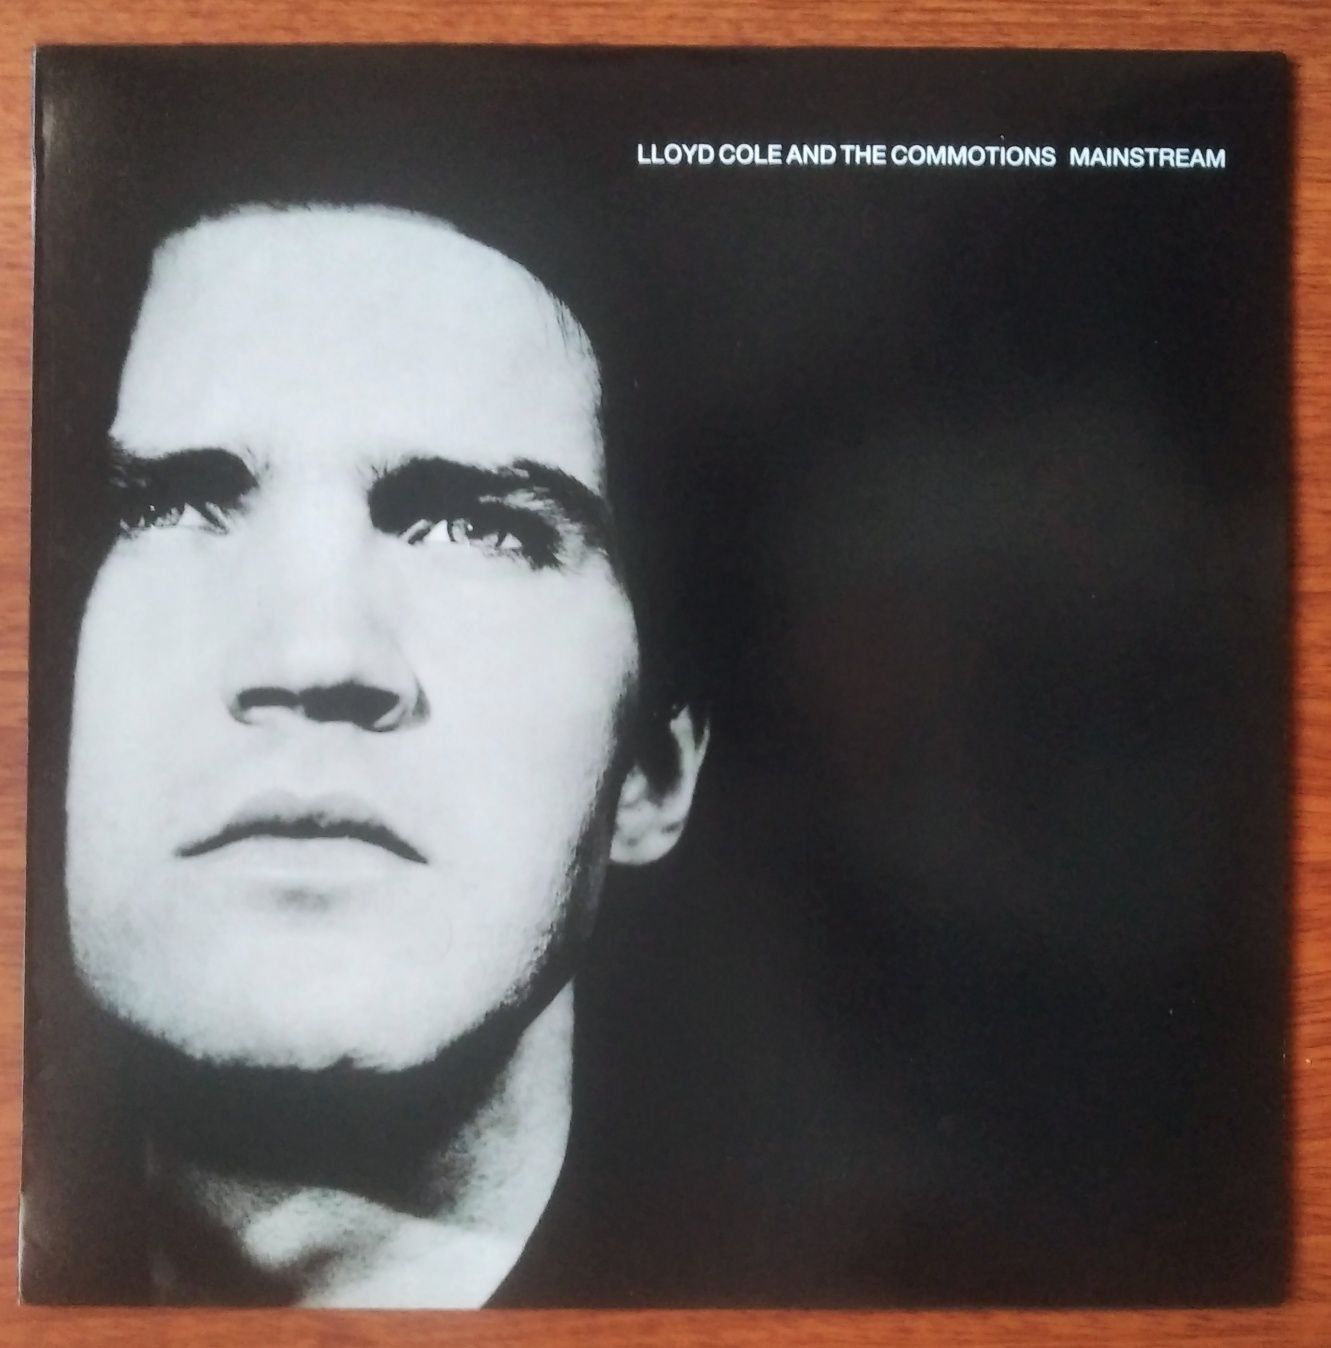 Lloyd Cole And The Commotions disco de vinil "Mainstream".